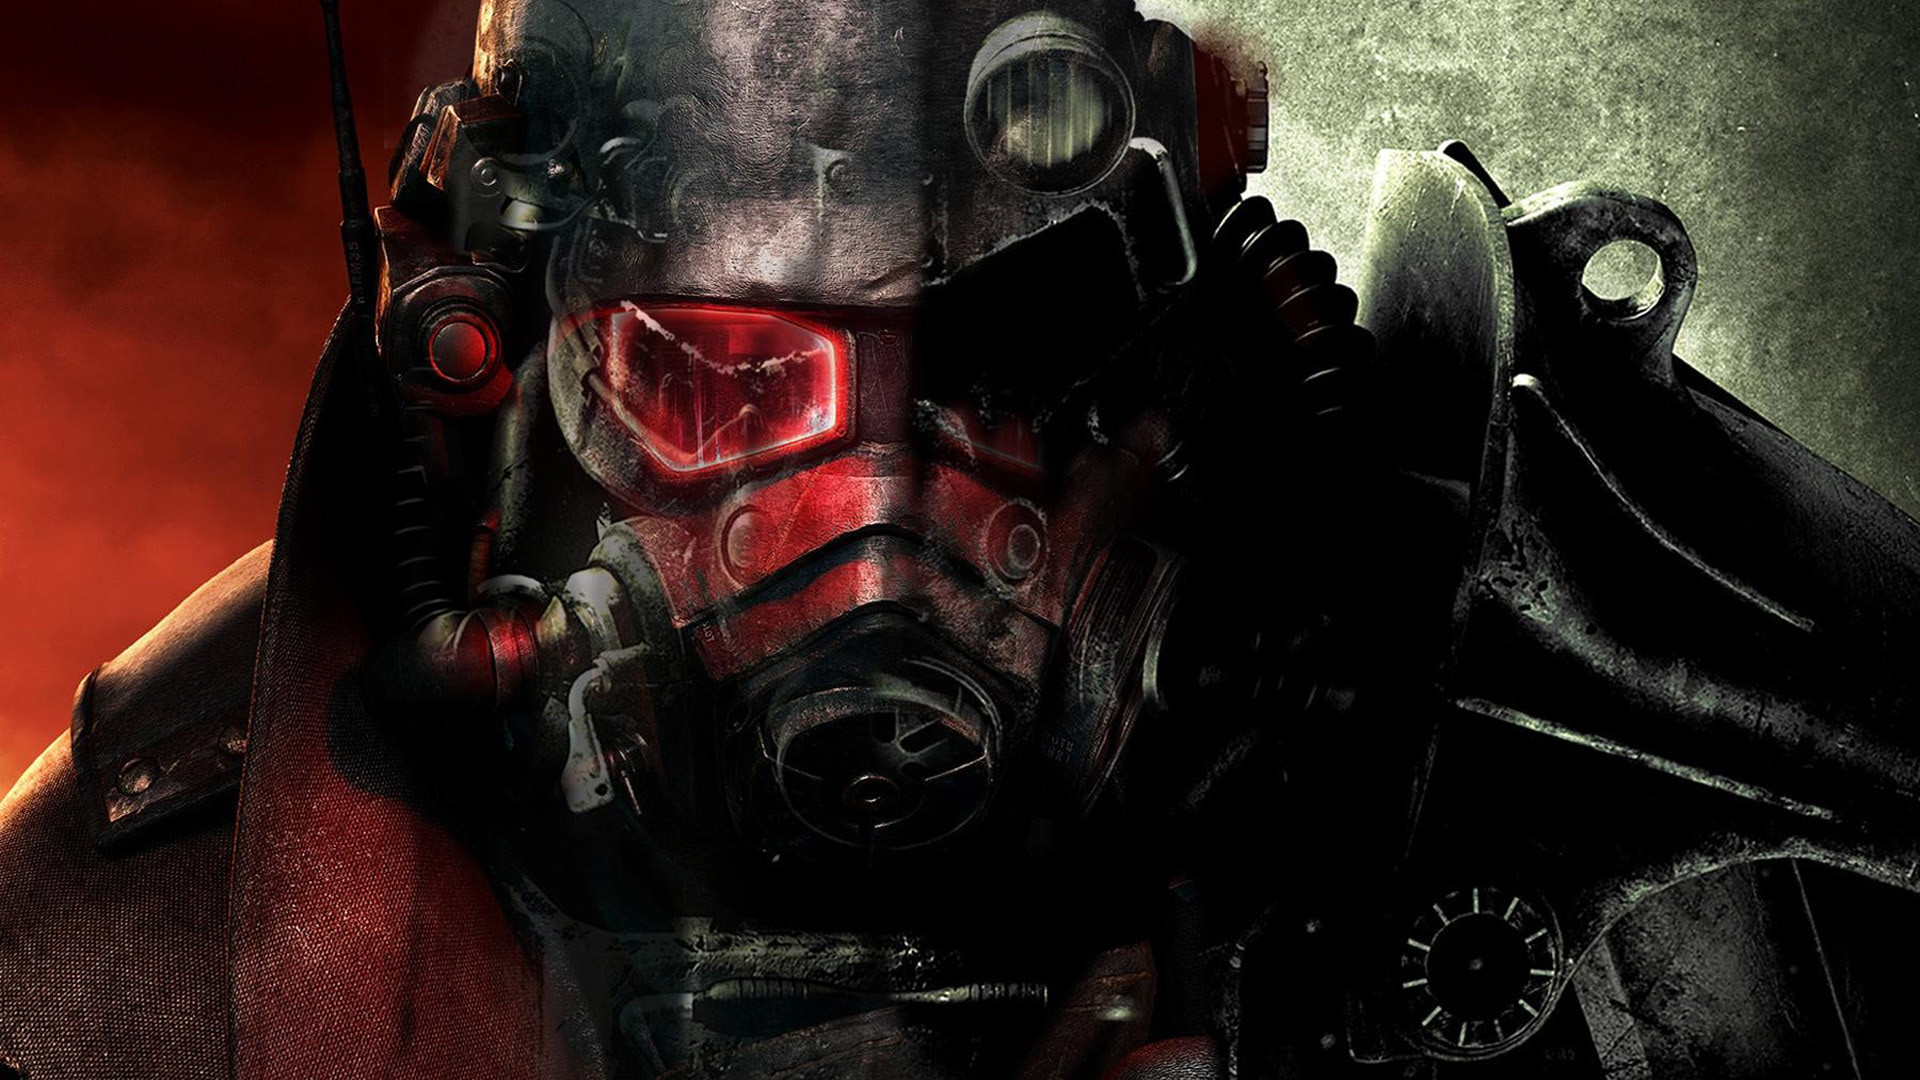 on September 29, 2015 By Stephen Comments Off on Fallout 4 Wallpaper .